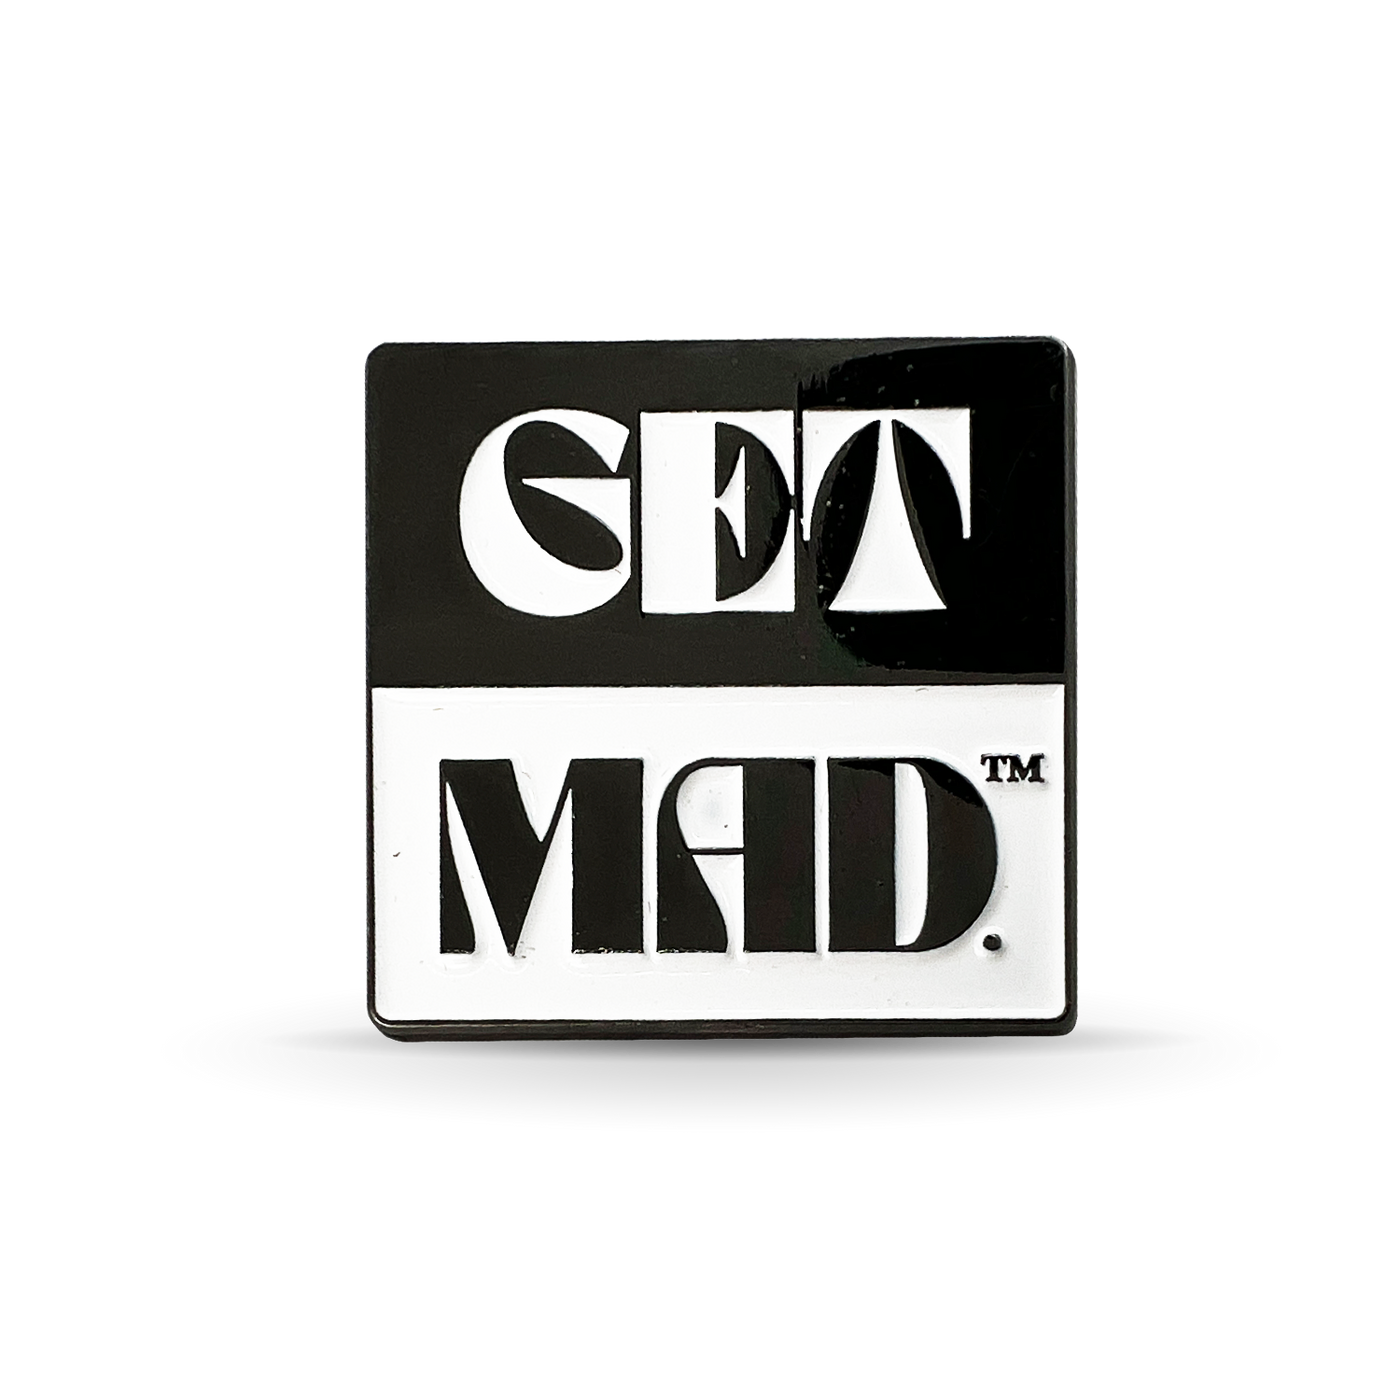 Get Mad Pin